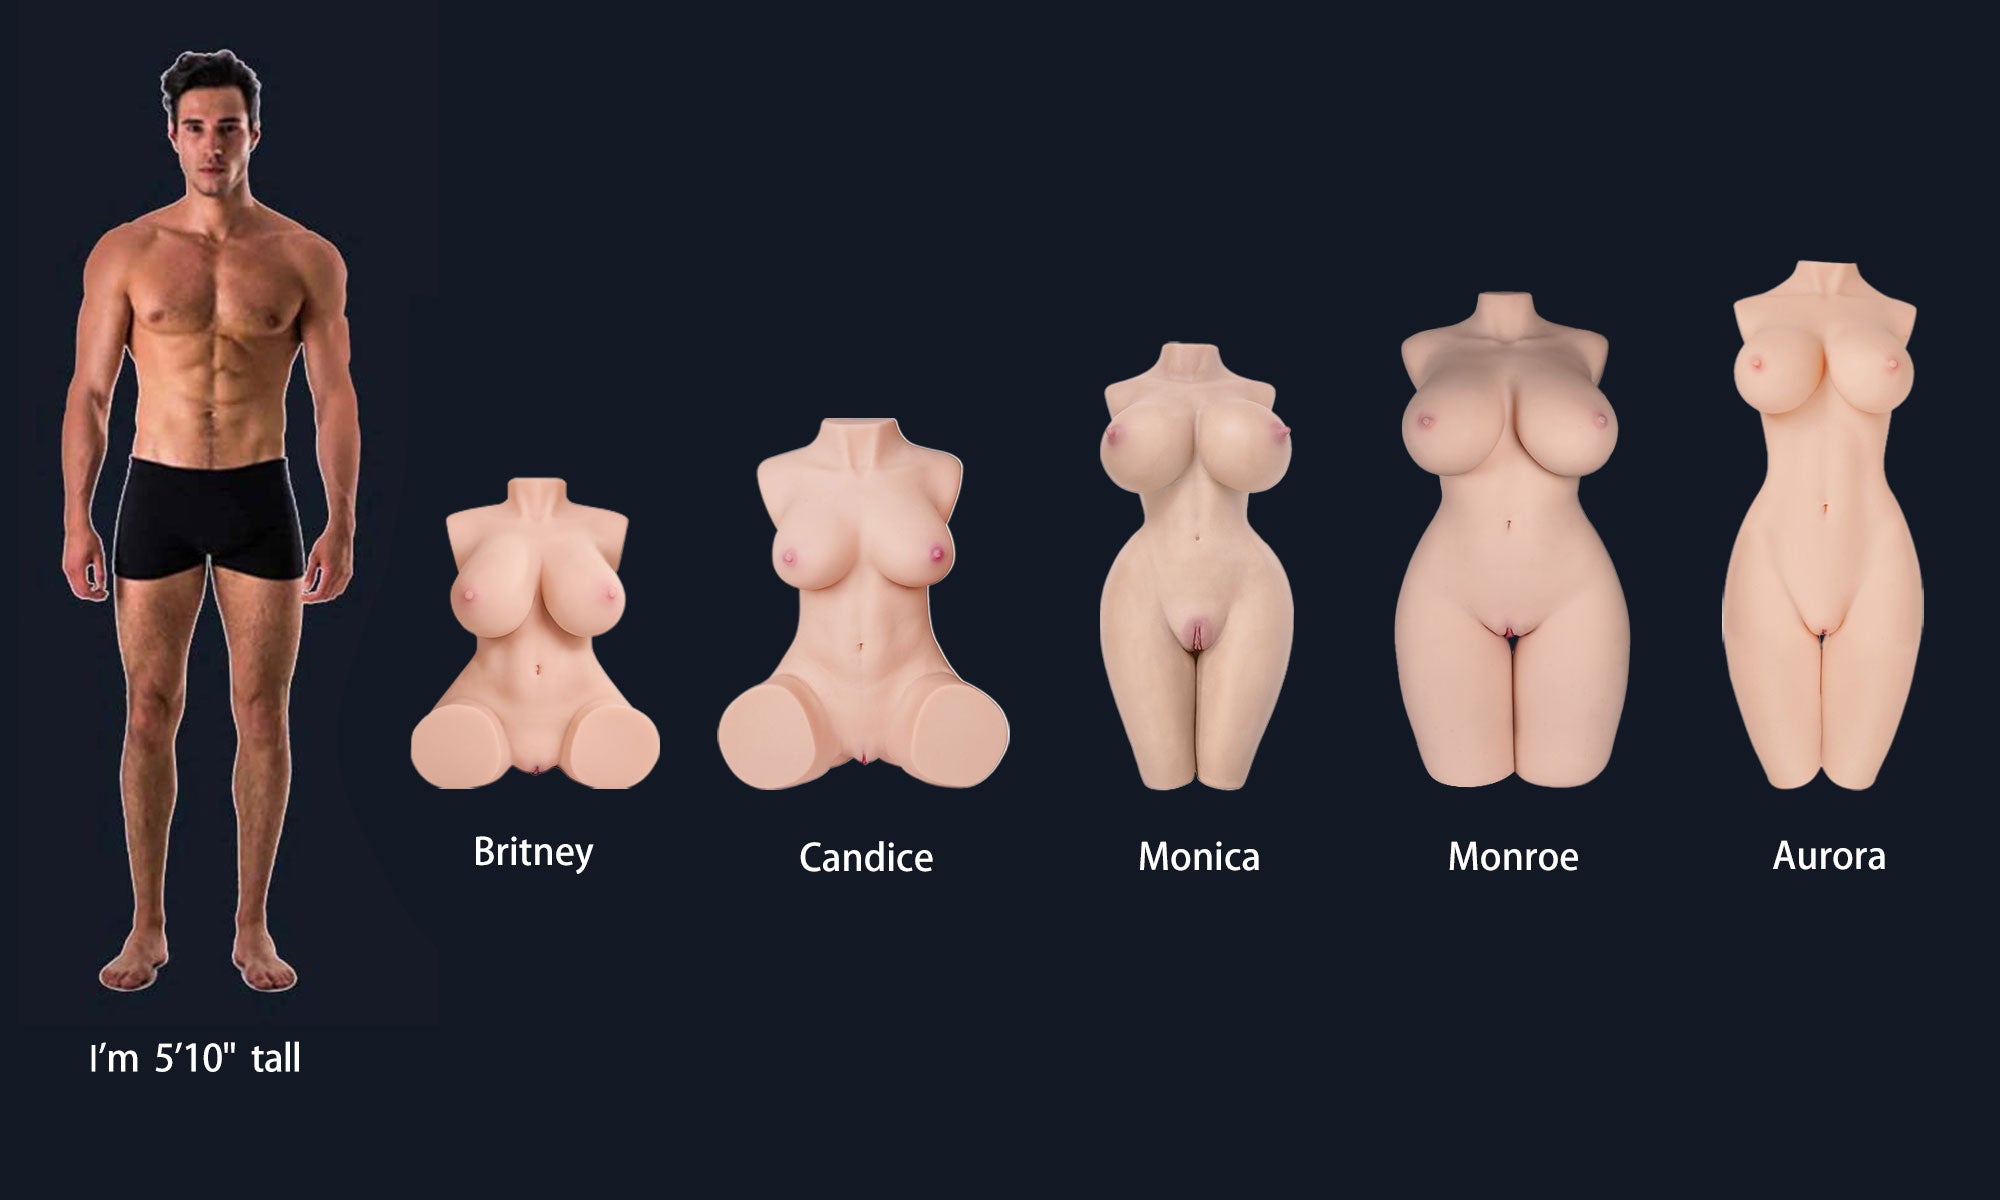 candice doll comparison with other hot dolls.jpg__PID:29cd8f95-e3b0-4e4f-ab06-6d91545ef4d1